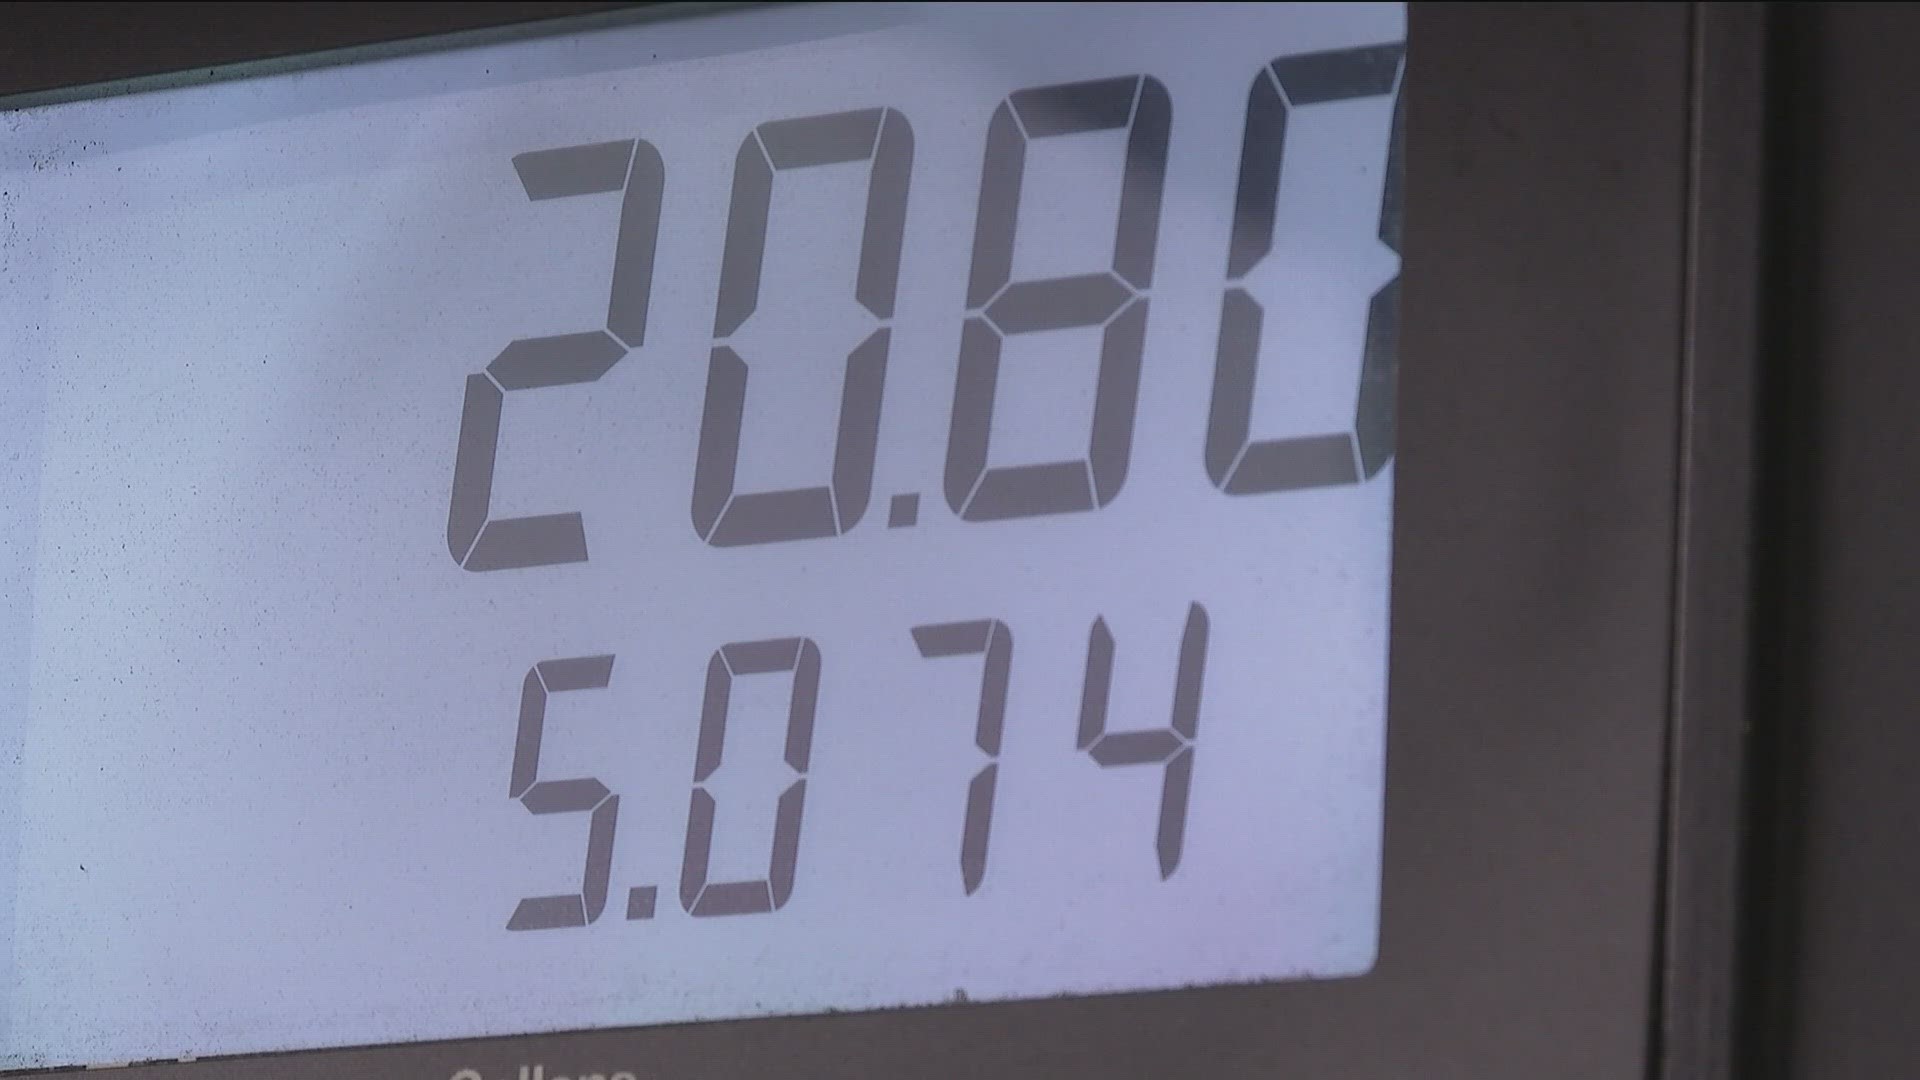 Gasoline has jumped 30-cents a gallon with the return of Georgia's gas tax